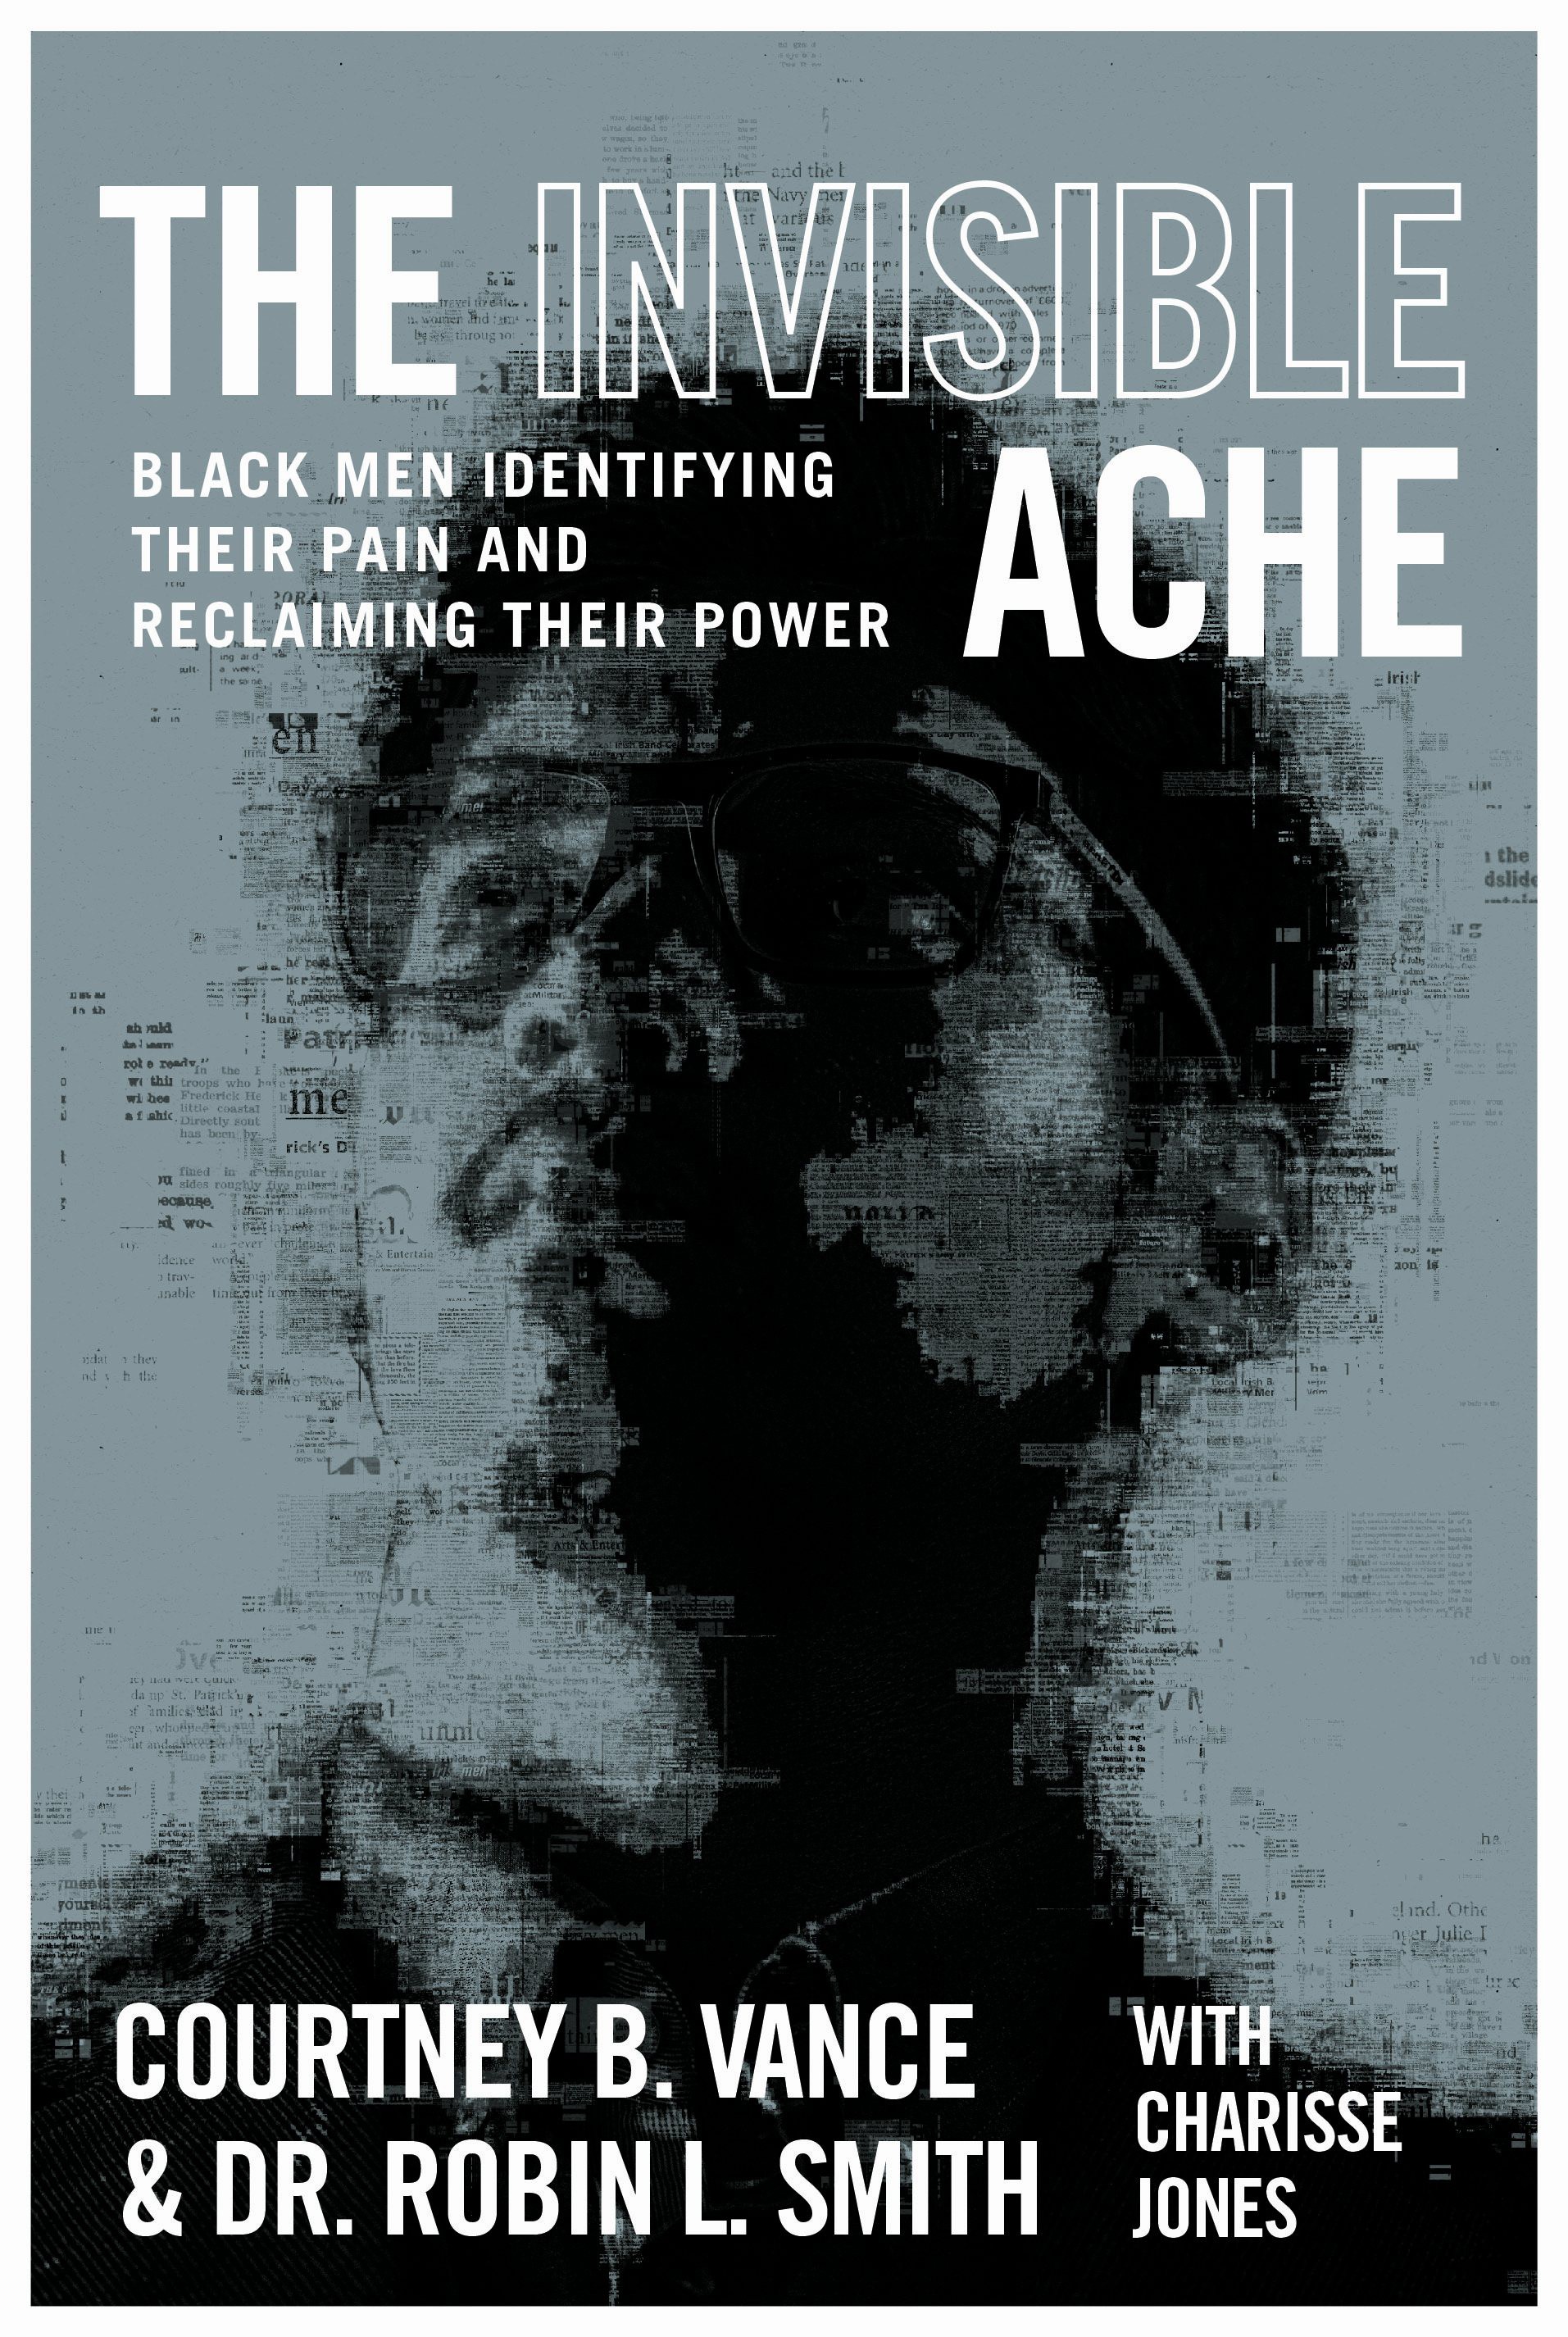 NDG Book Review: ‘The Invisible Ache’ is raw and insightful